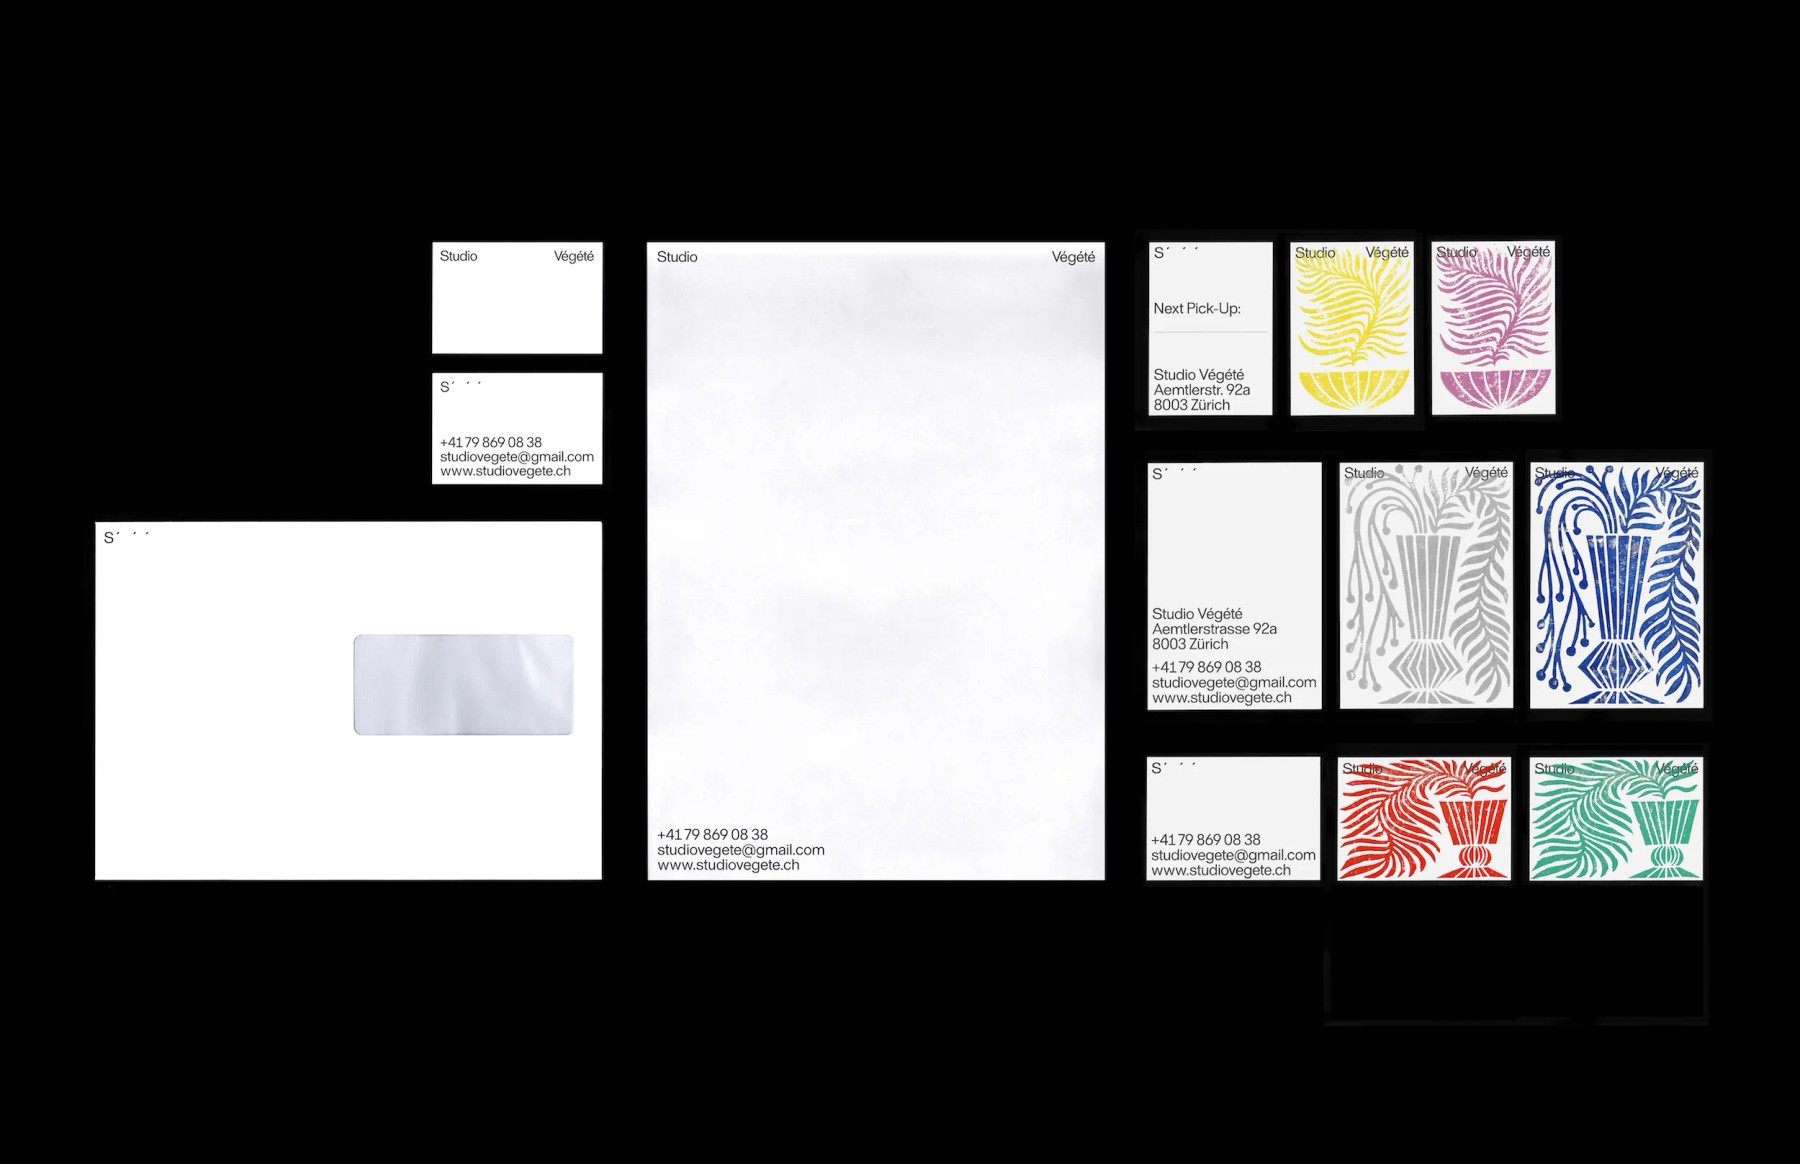 kevin-hoegger-graphic-design-itsnicethat-07.jpg